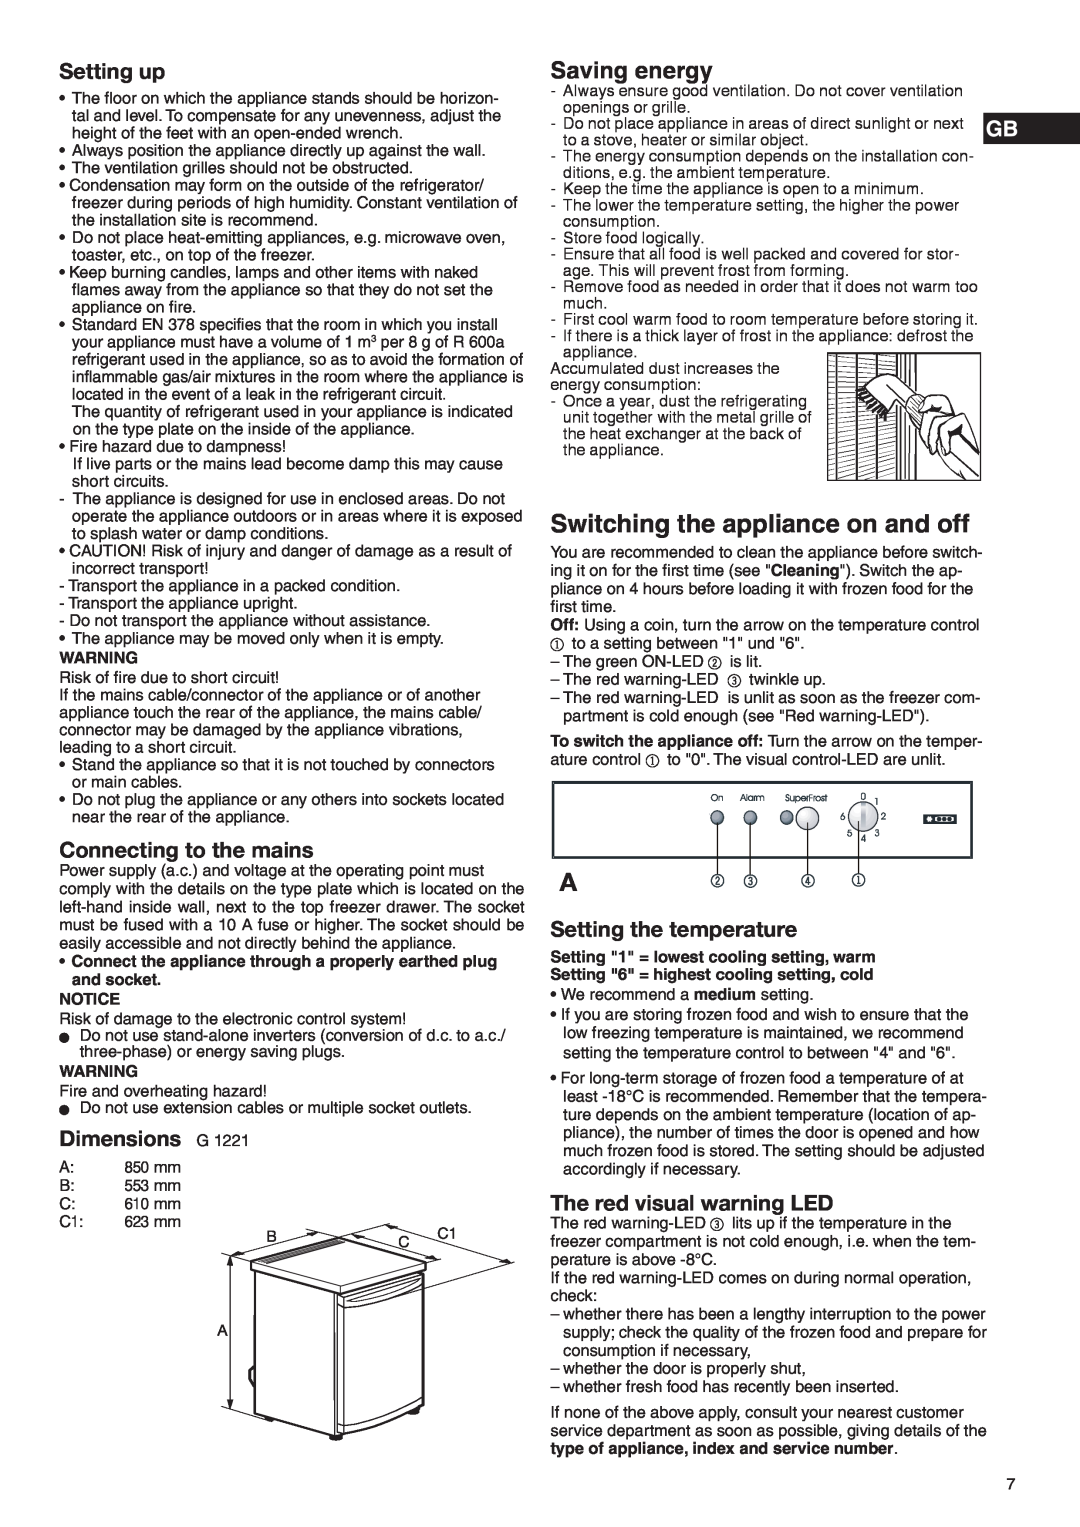 Liebherr 7080 904-00 manual Saving energy, Setting up, Connecting to the mains, Dimensions G, Setting the temperature 